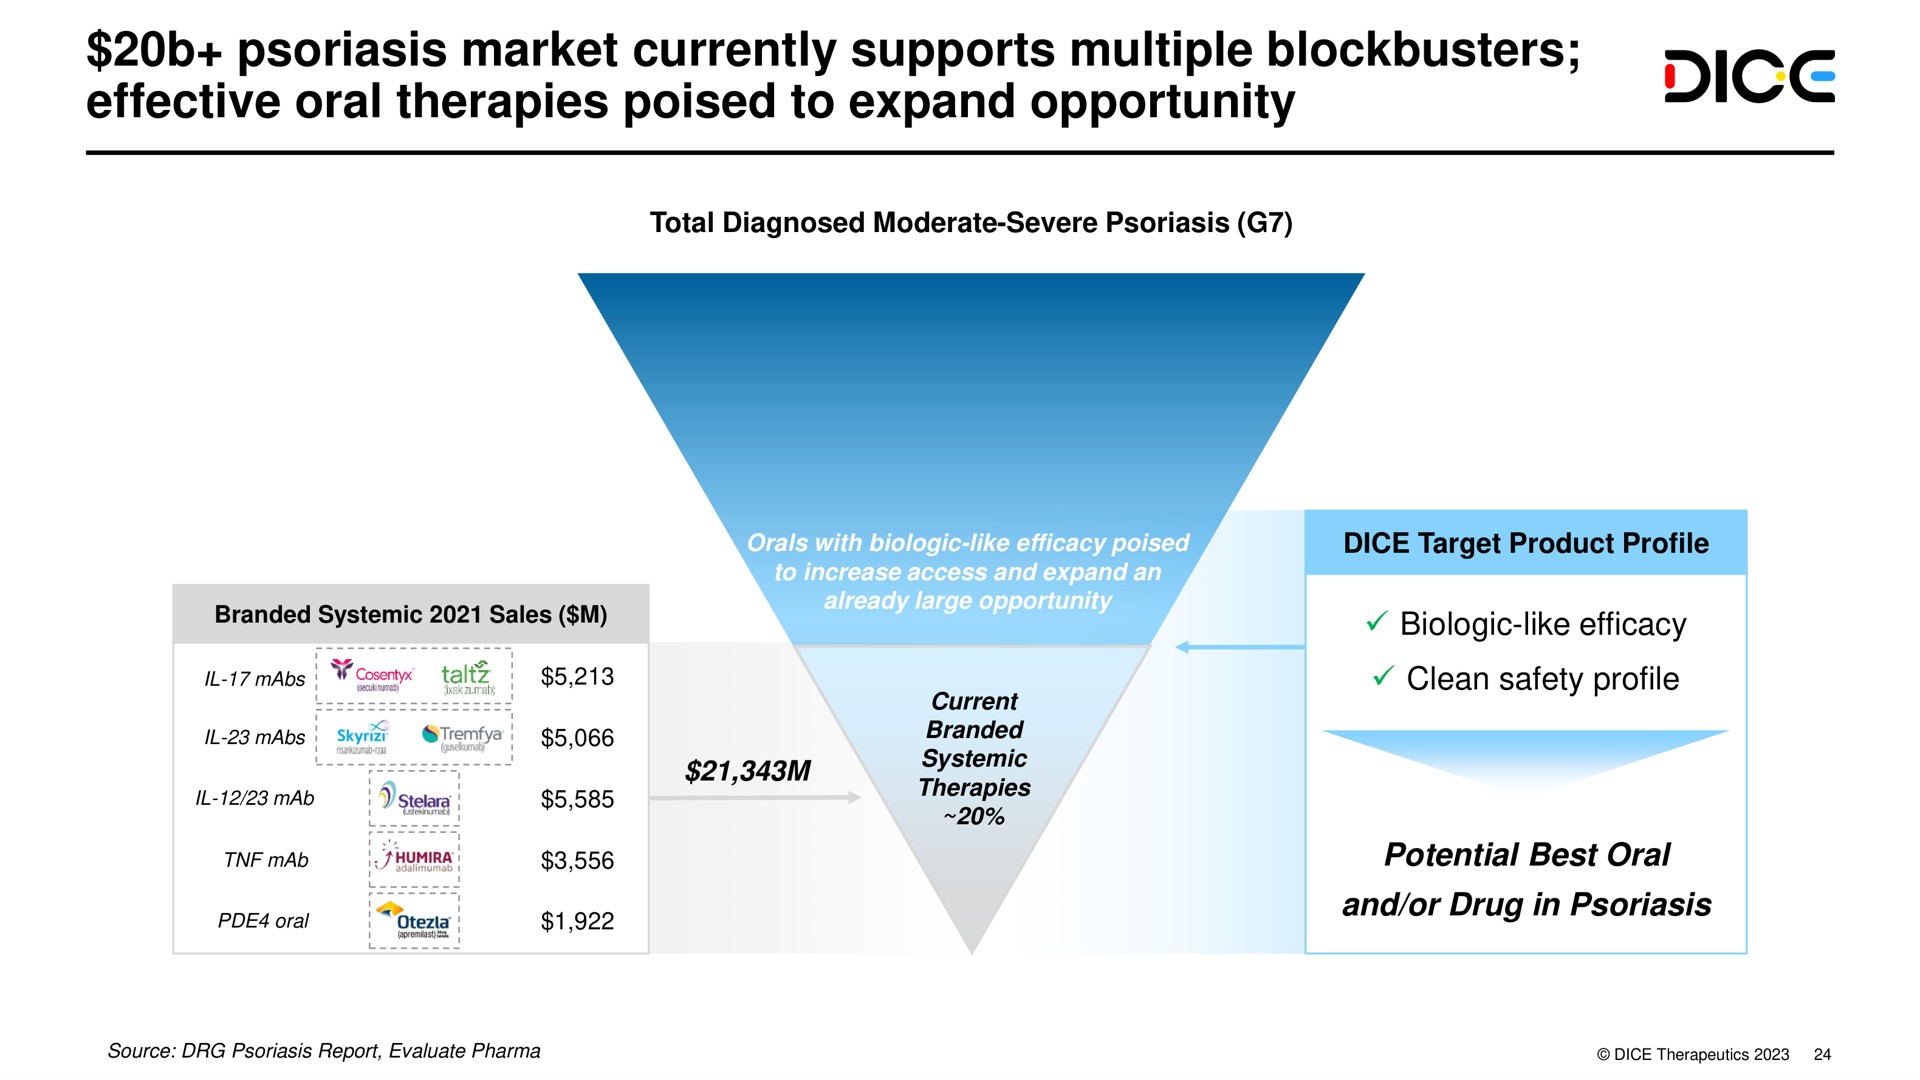 psoriasis market currently supports multiple blockbusters effective oral therapies poised to expand opportunity | DICE Therapeutics